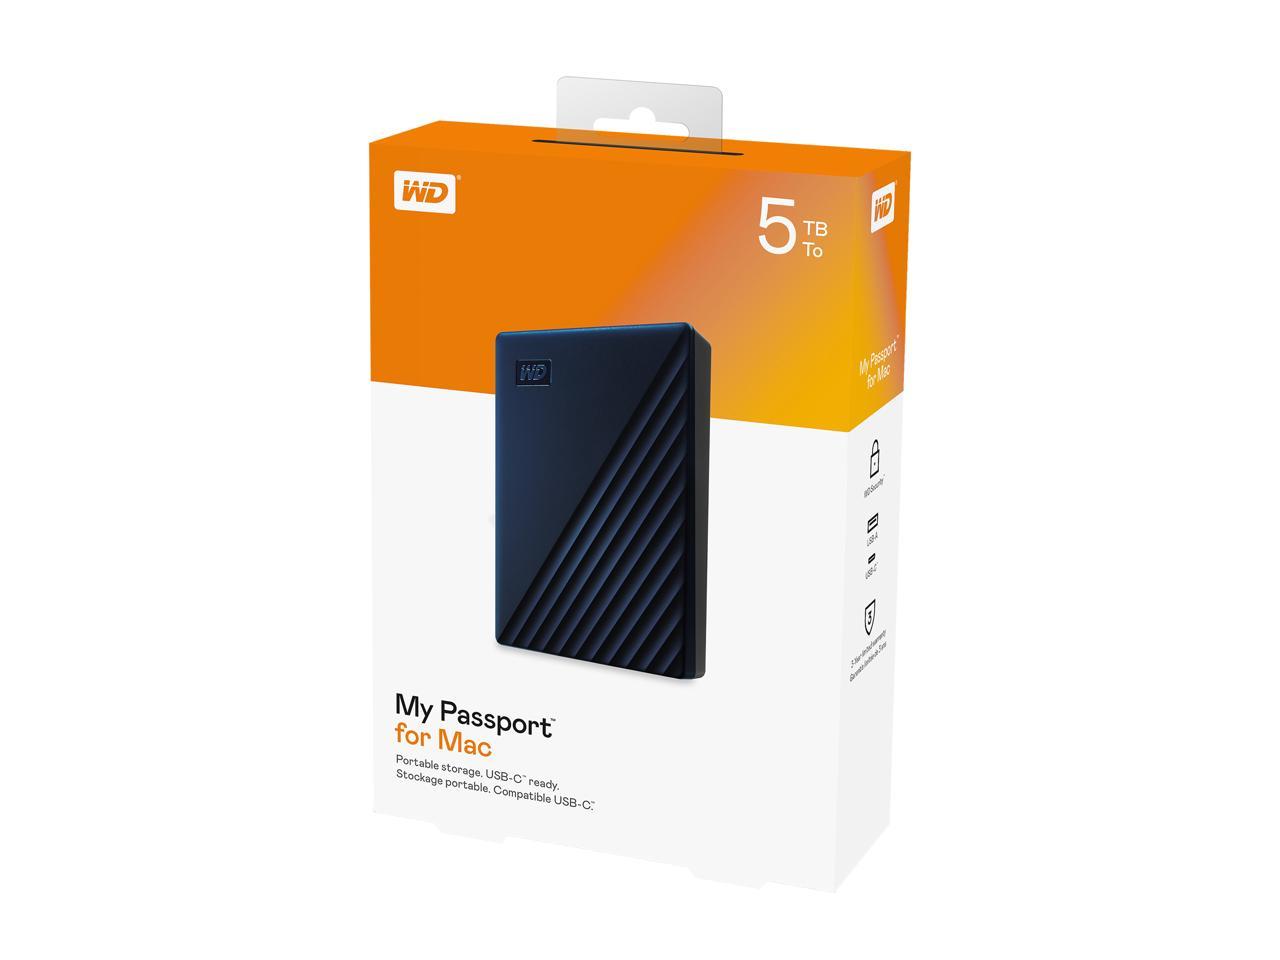 format a wd my passport for mac